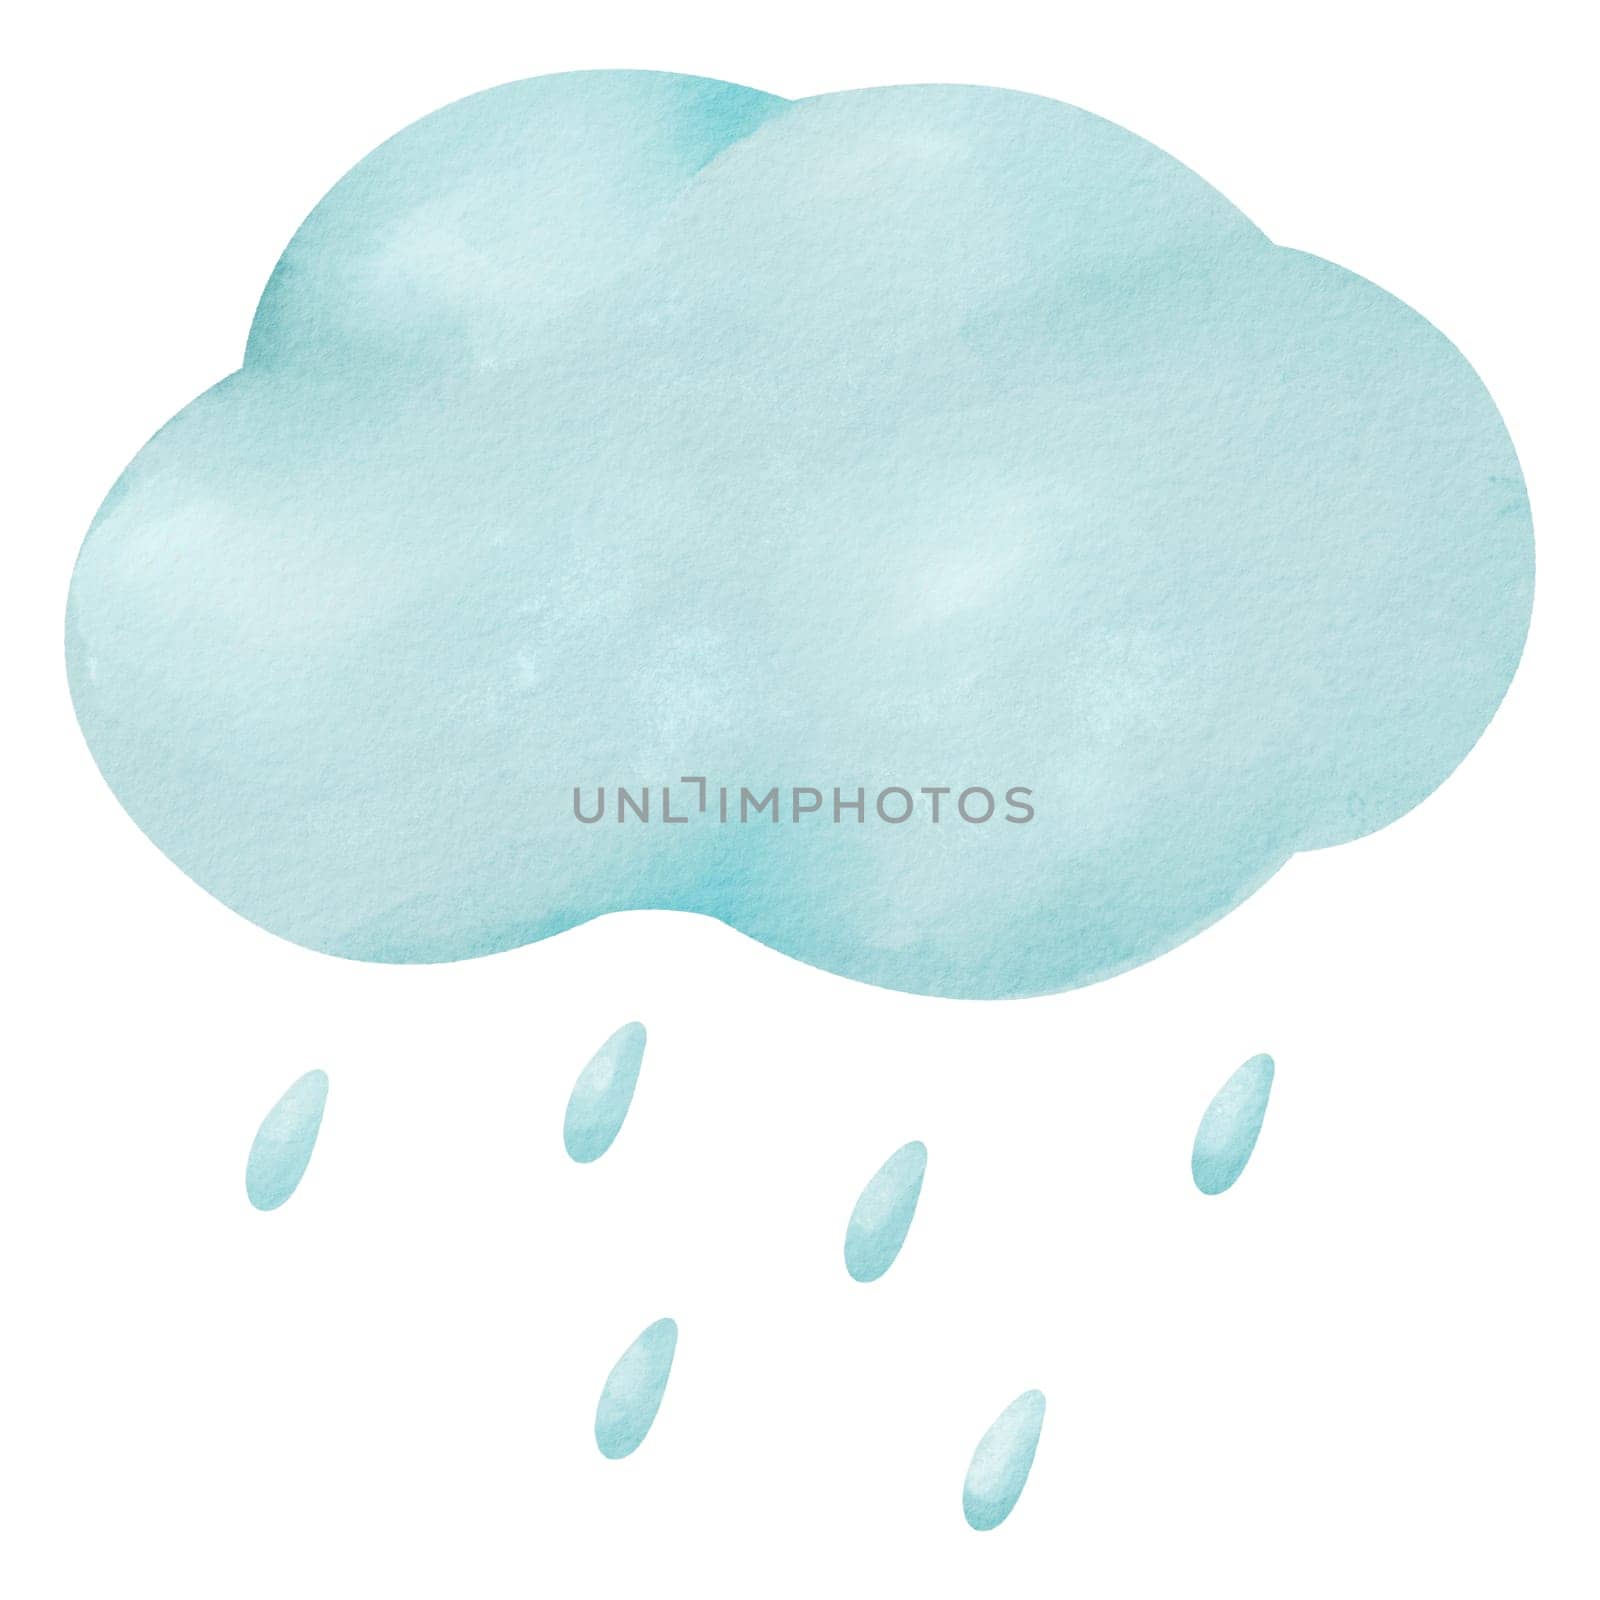 watercolor illustration. fluffy cloud and gentle raindrops in a cartoon style. for children's books, weather-related graphics, or imaginative artworks. delightful and soothing atmosphere.